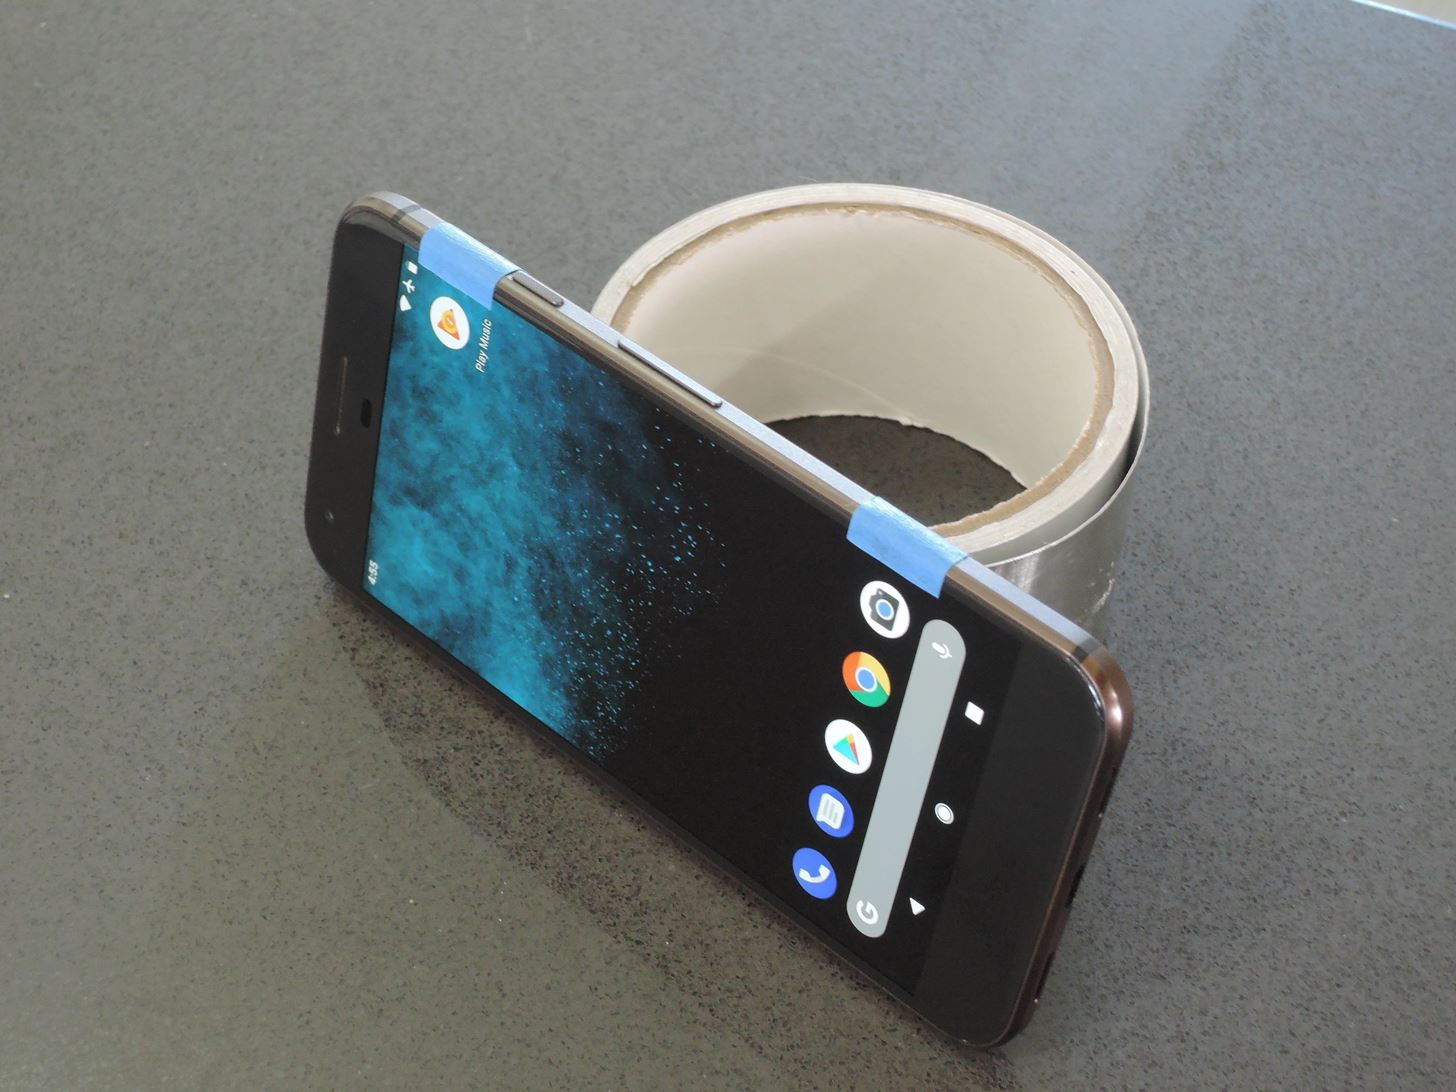 Add Shoulder Buttons to Any Phone with a Few Strips of Tape